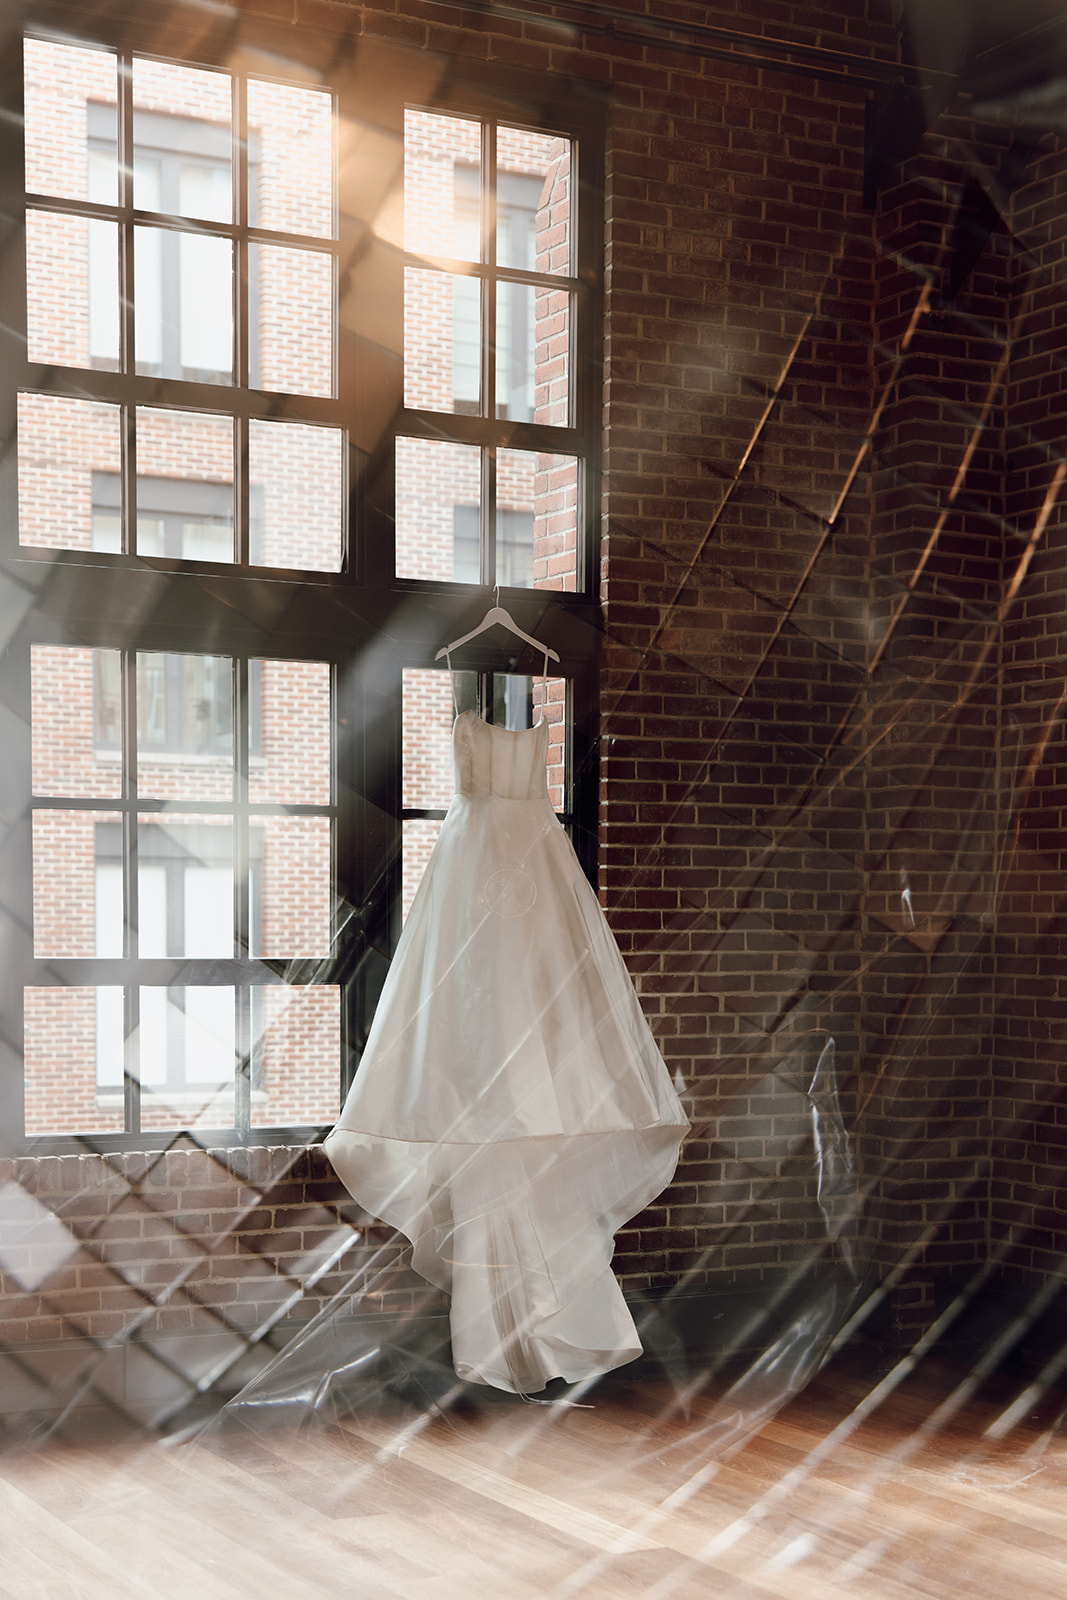 the wedding dress hanging up at the wedding venue for the wedding photographer in Washington DC